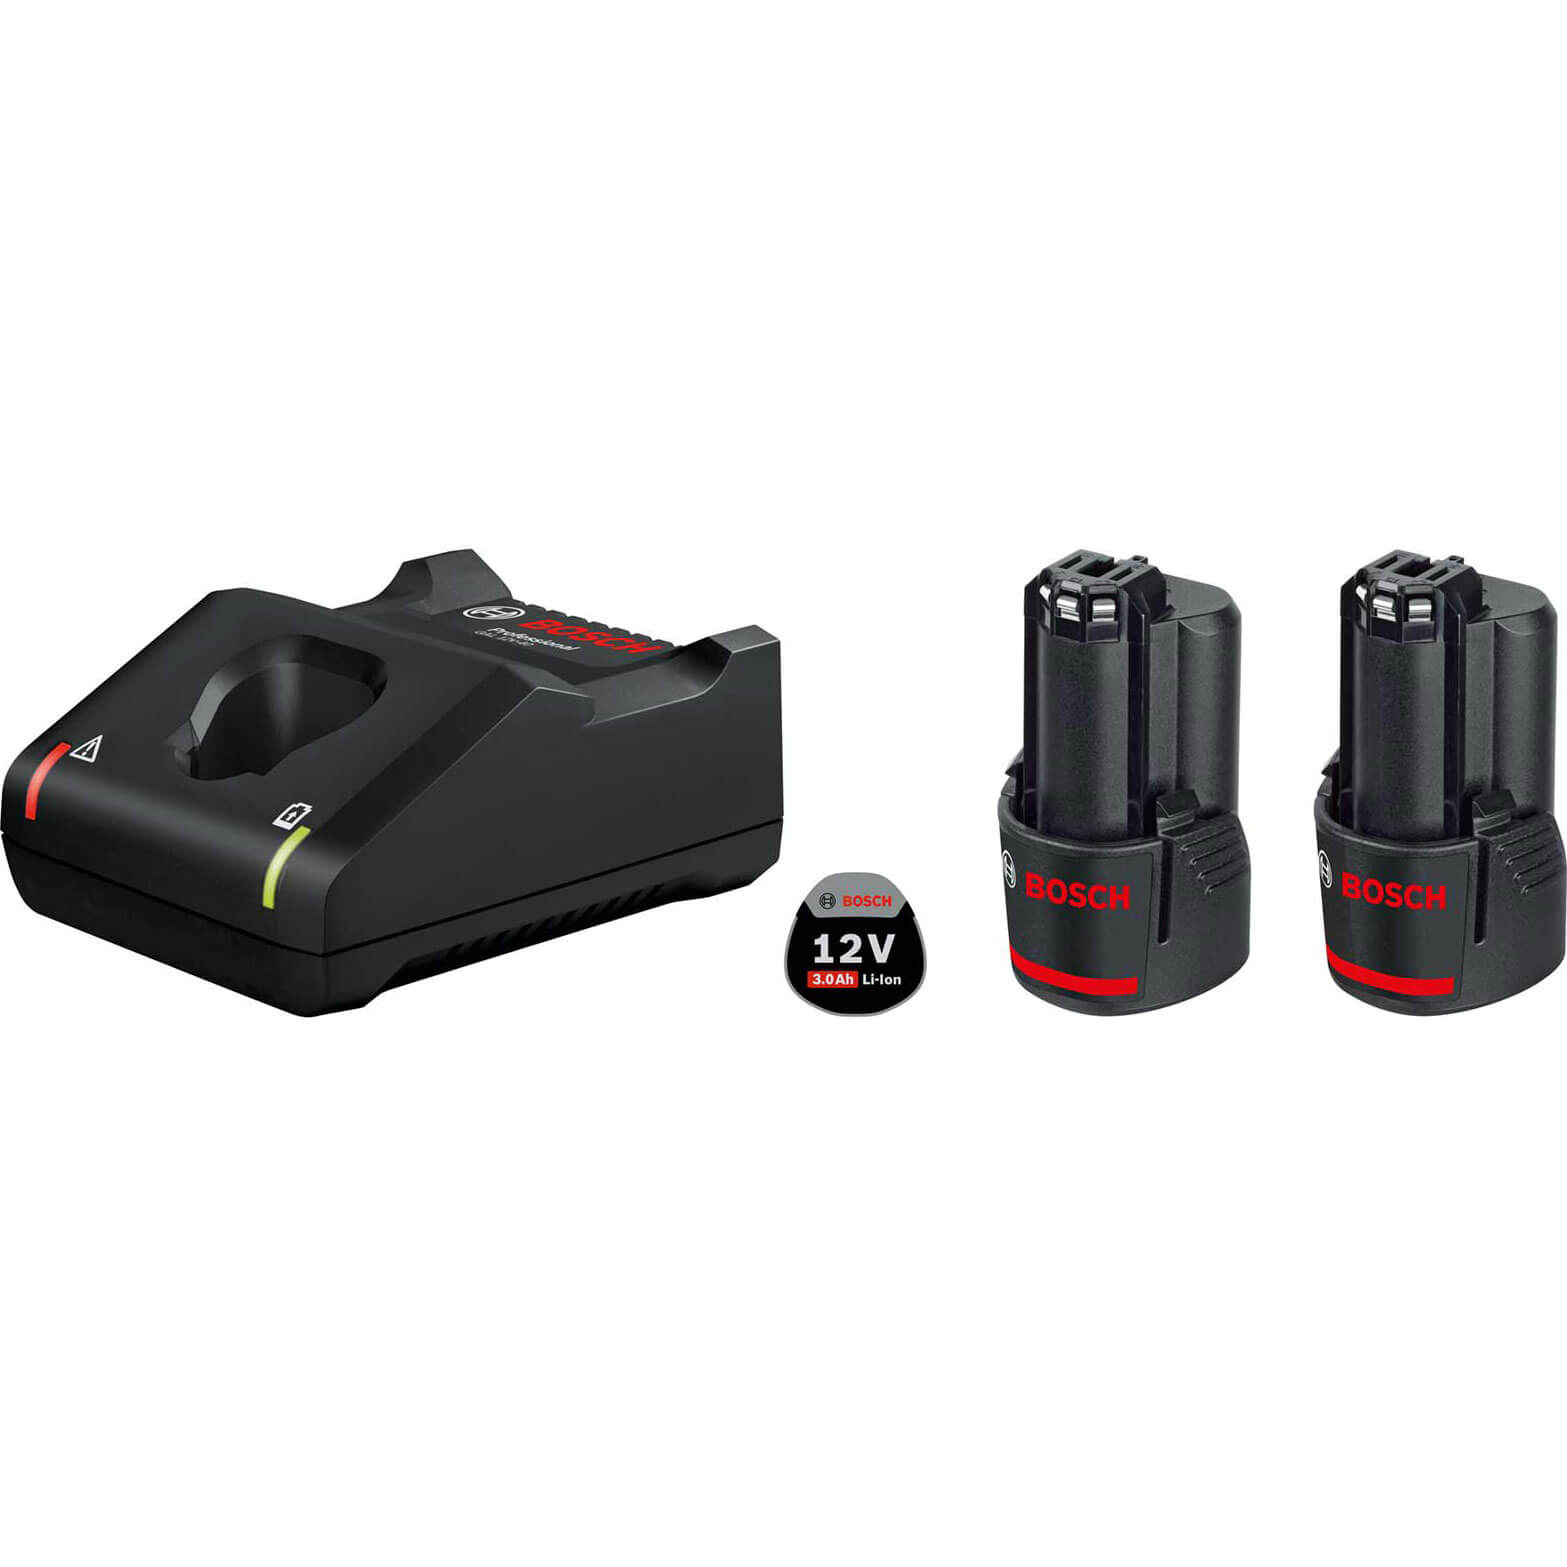 Photos - Power Tool Battery Bosch PRO 12v Cordless CoolPack Li-ion Batteries 3ah and Charger Set 240v 